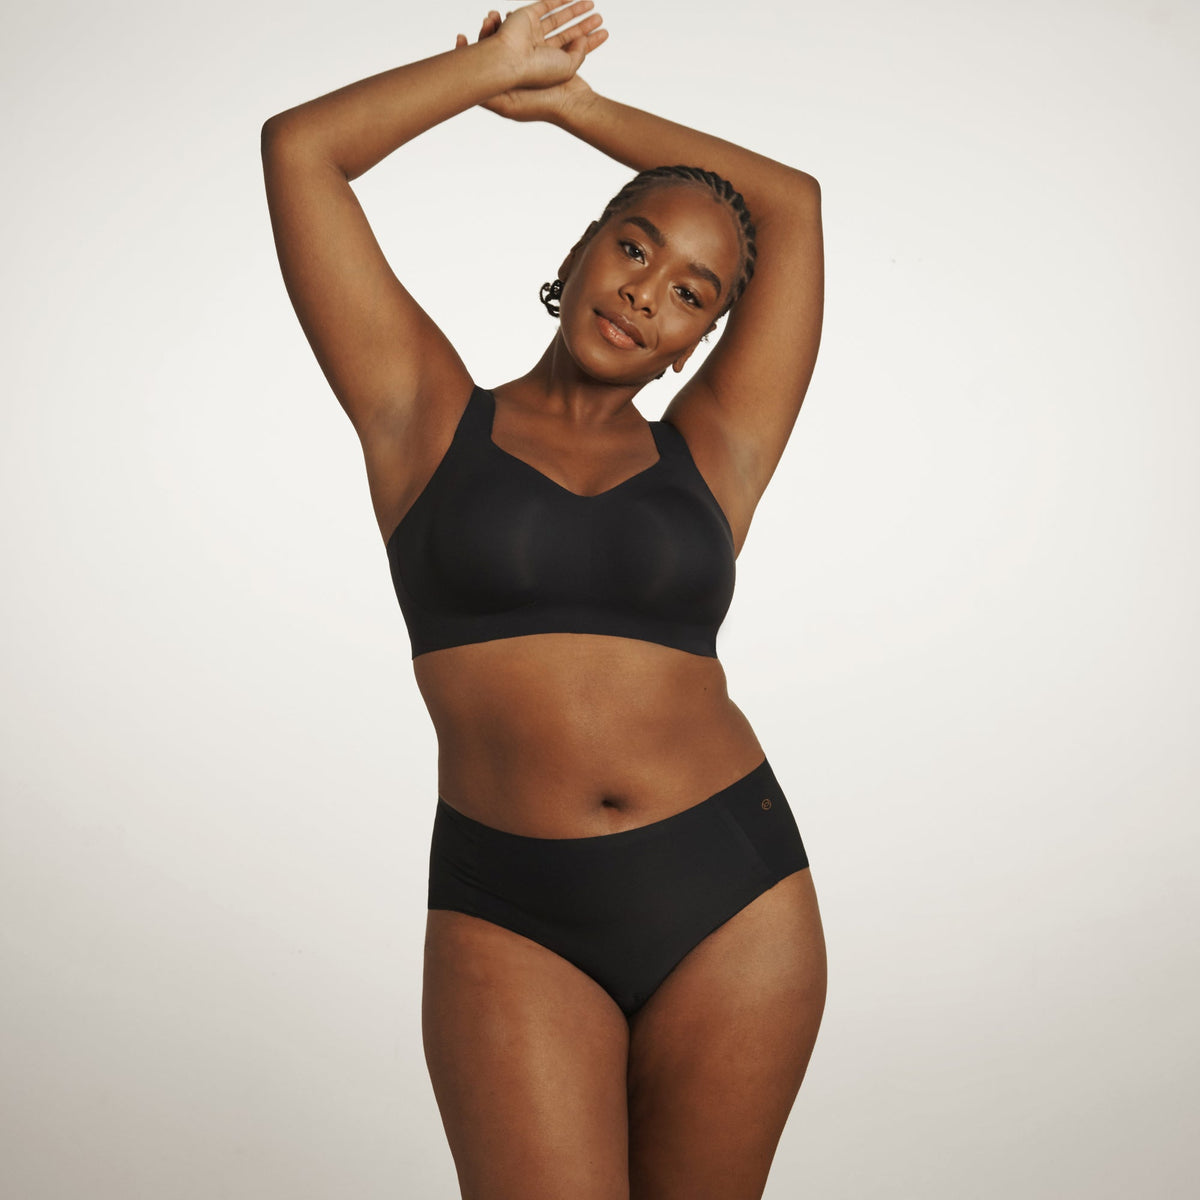 Bravo Intimates - Bra Fit Experts - This wire-free, seamless bra from Evelyn  & Bobbie will go BEYOND your expectations! When you wear this, you'll be  surprised it's wire-free because the firm